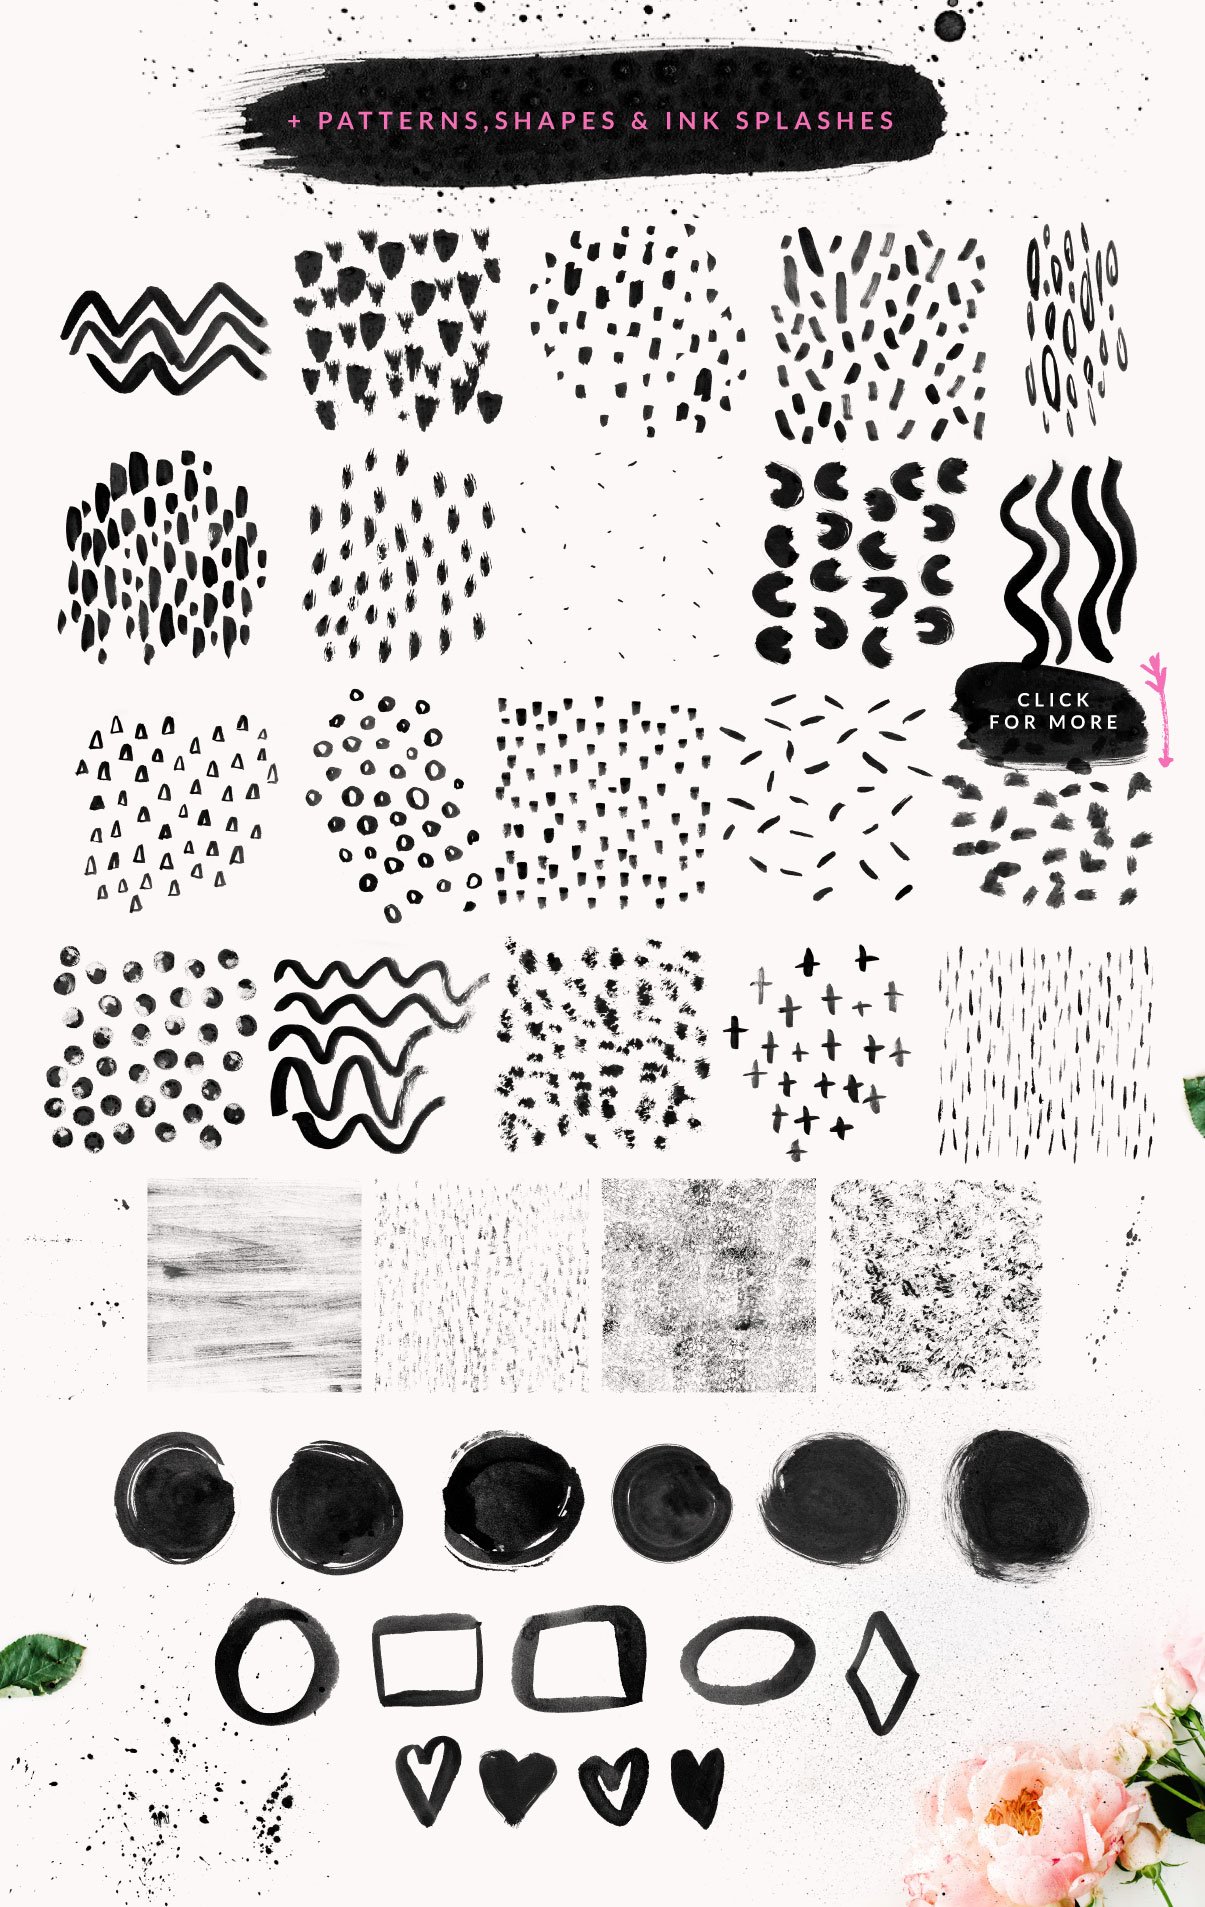 100 Paint Brush Stamps For Procreate